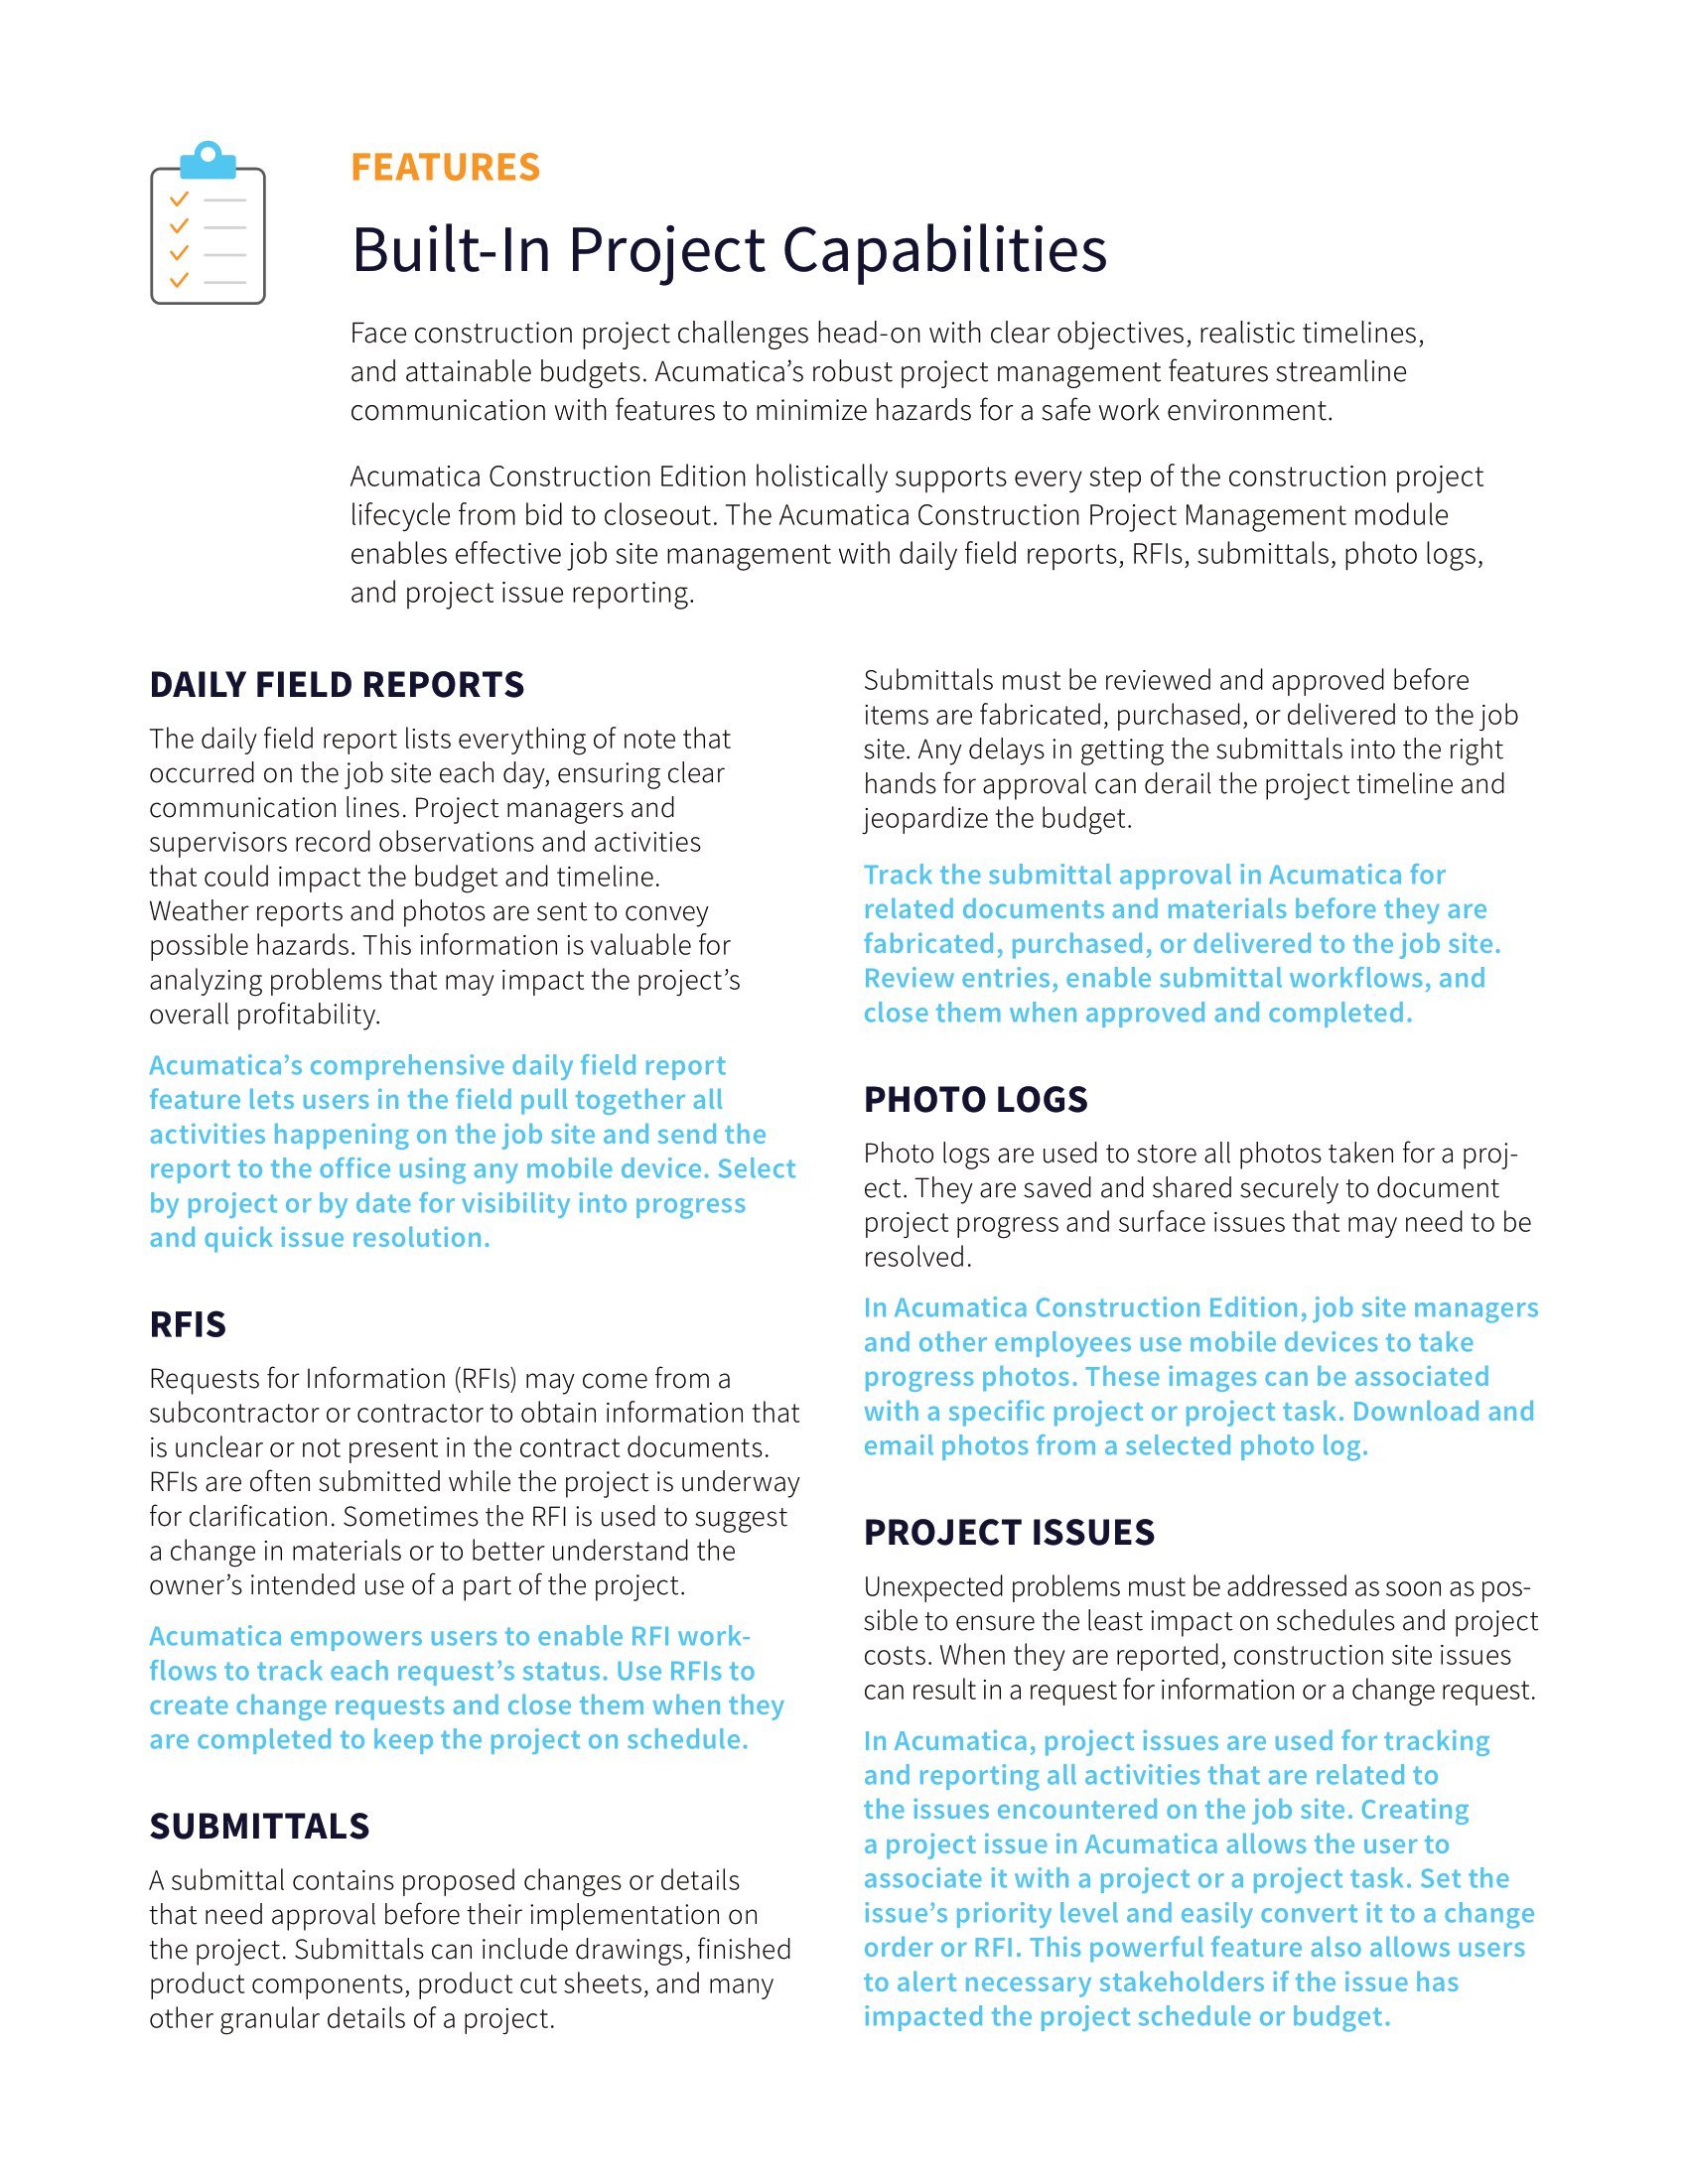 What Do Construction Project Managers Need to Succeed? A Centralized, Extensible System. , page 2